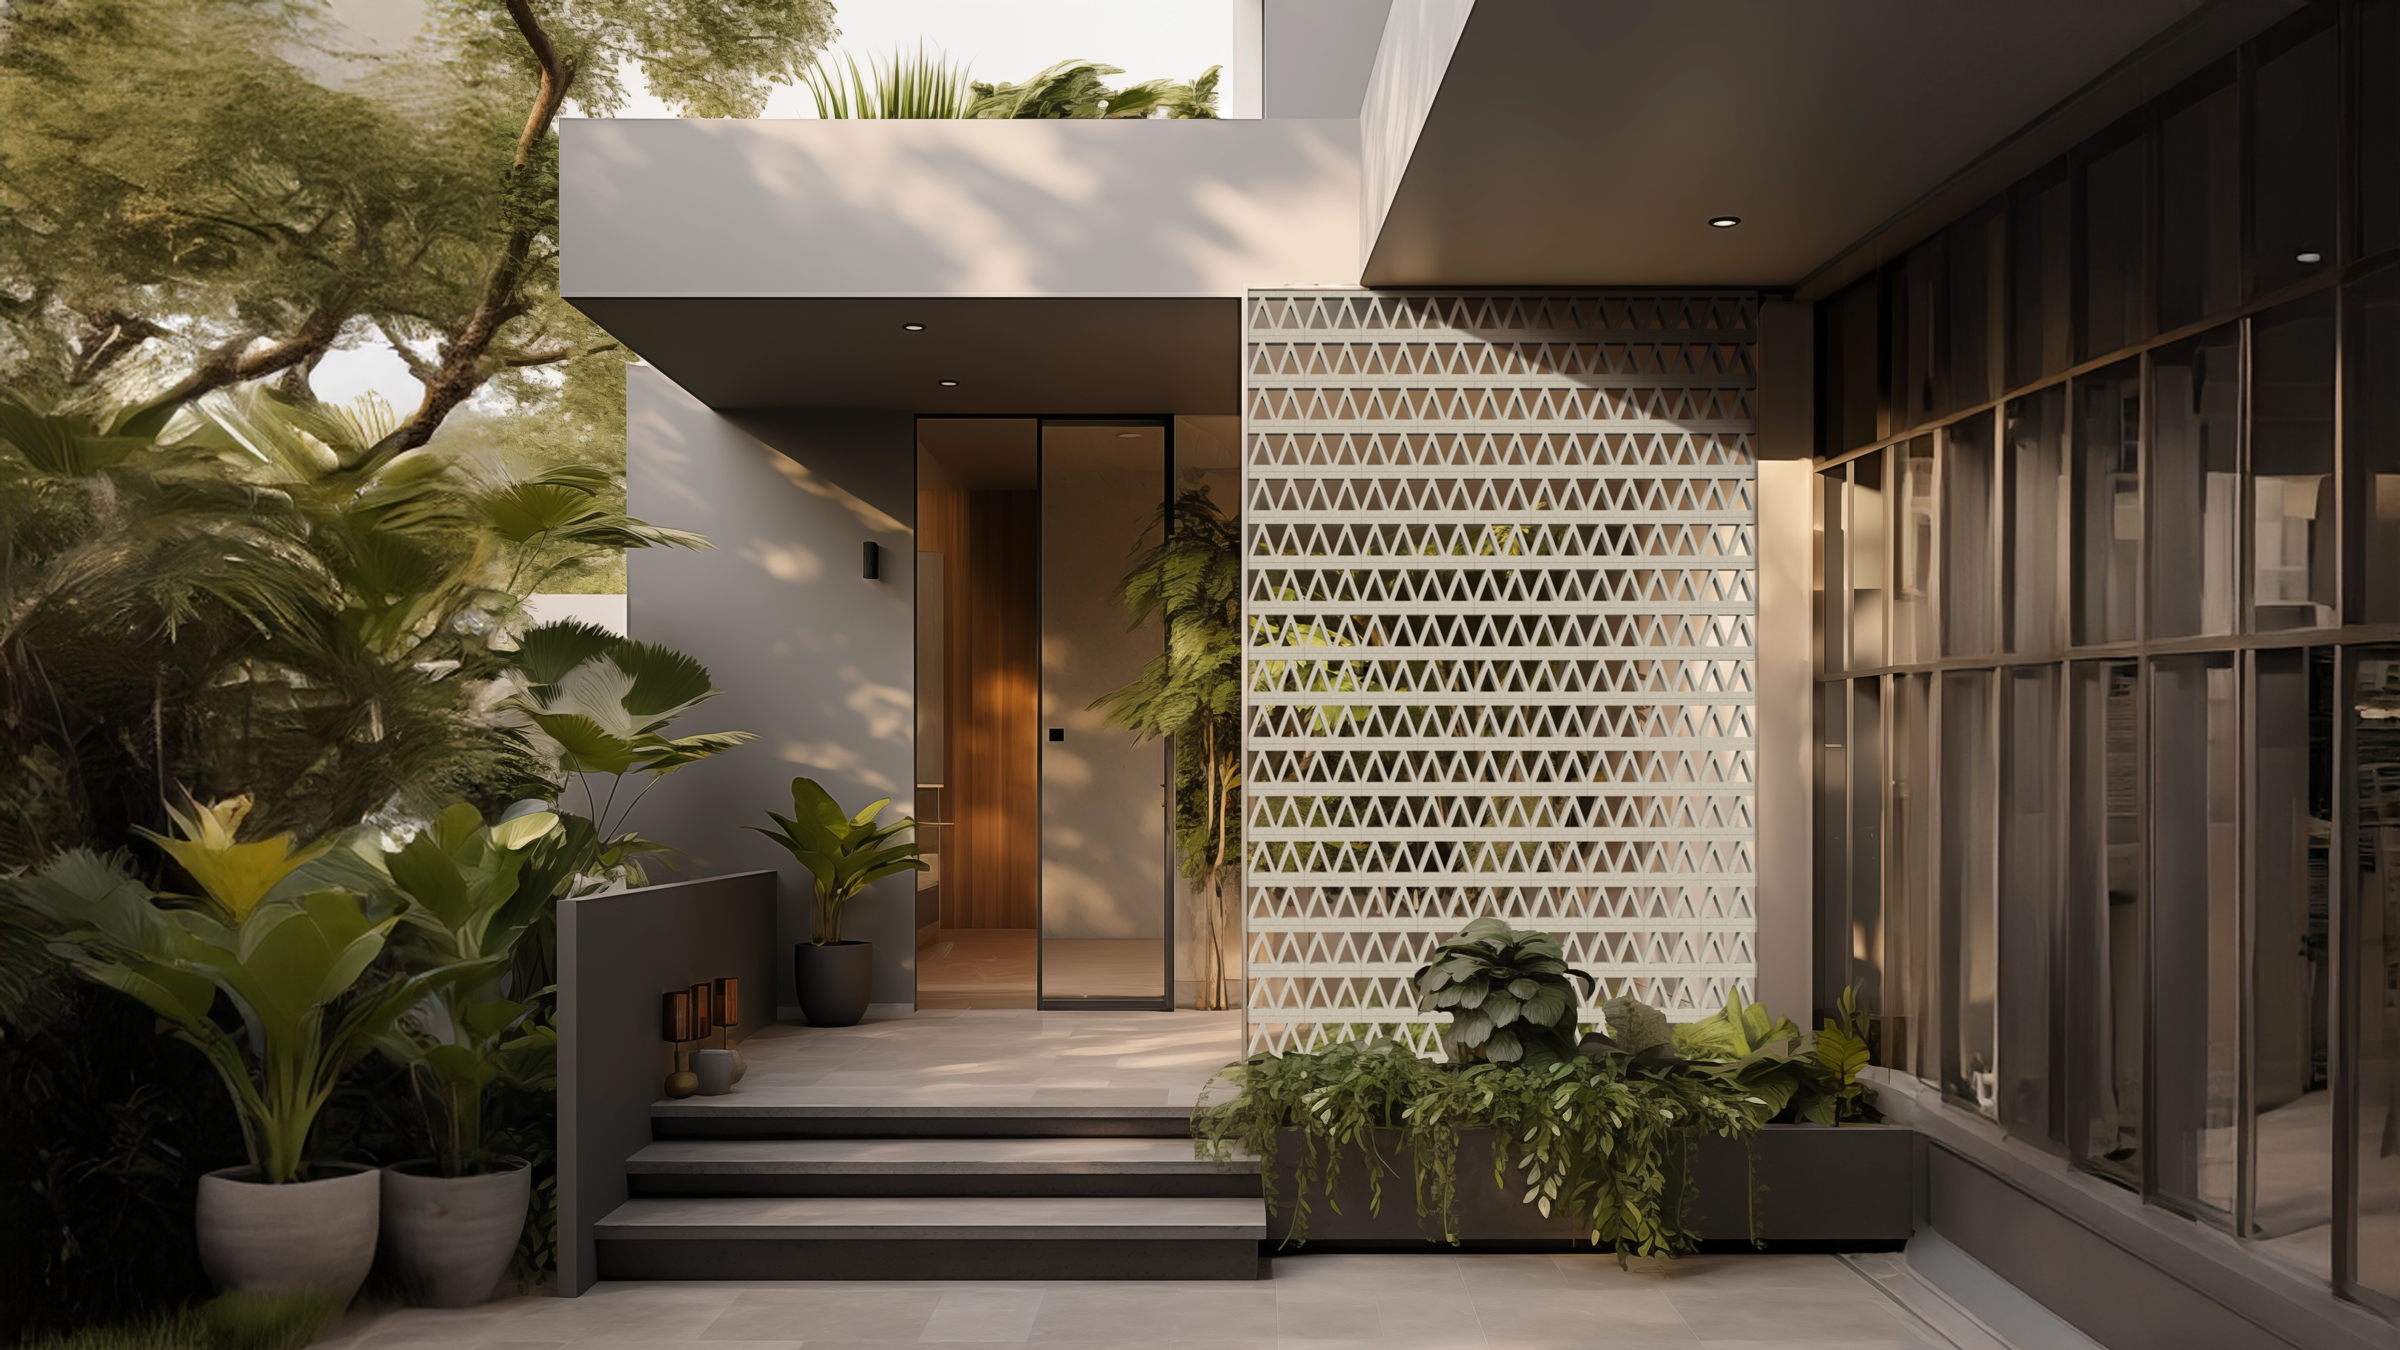 Facade of a modern home in Singapore featuring Jonite's decorative stone breeze blocks. The design includes geometric patterns, lush greenery, and a minimalist aesthetic, enhancing air circulation and natural light diffusion.